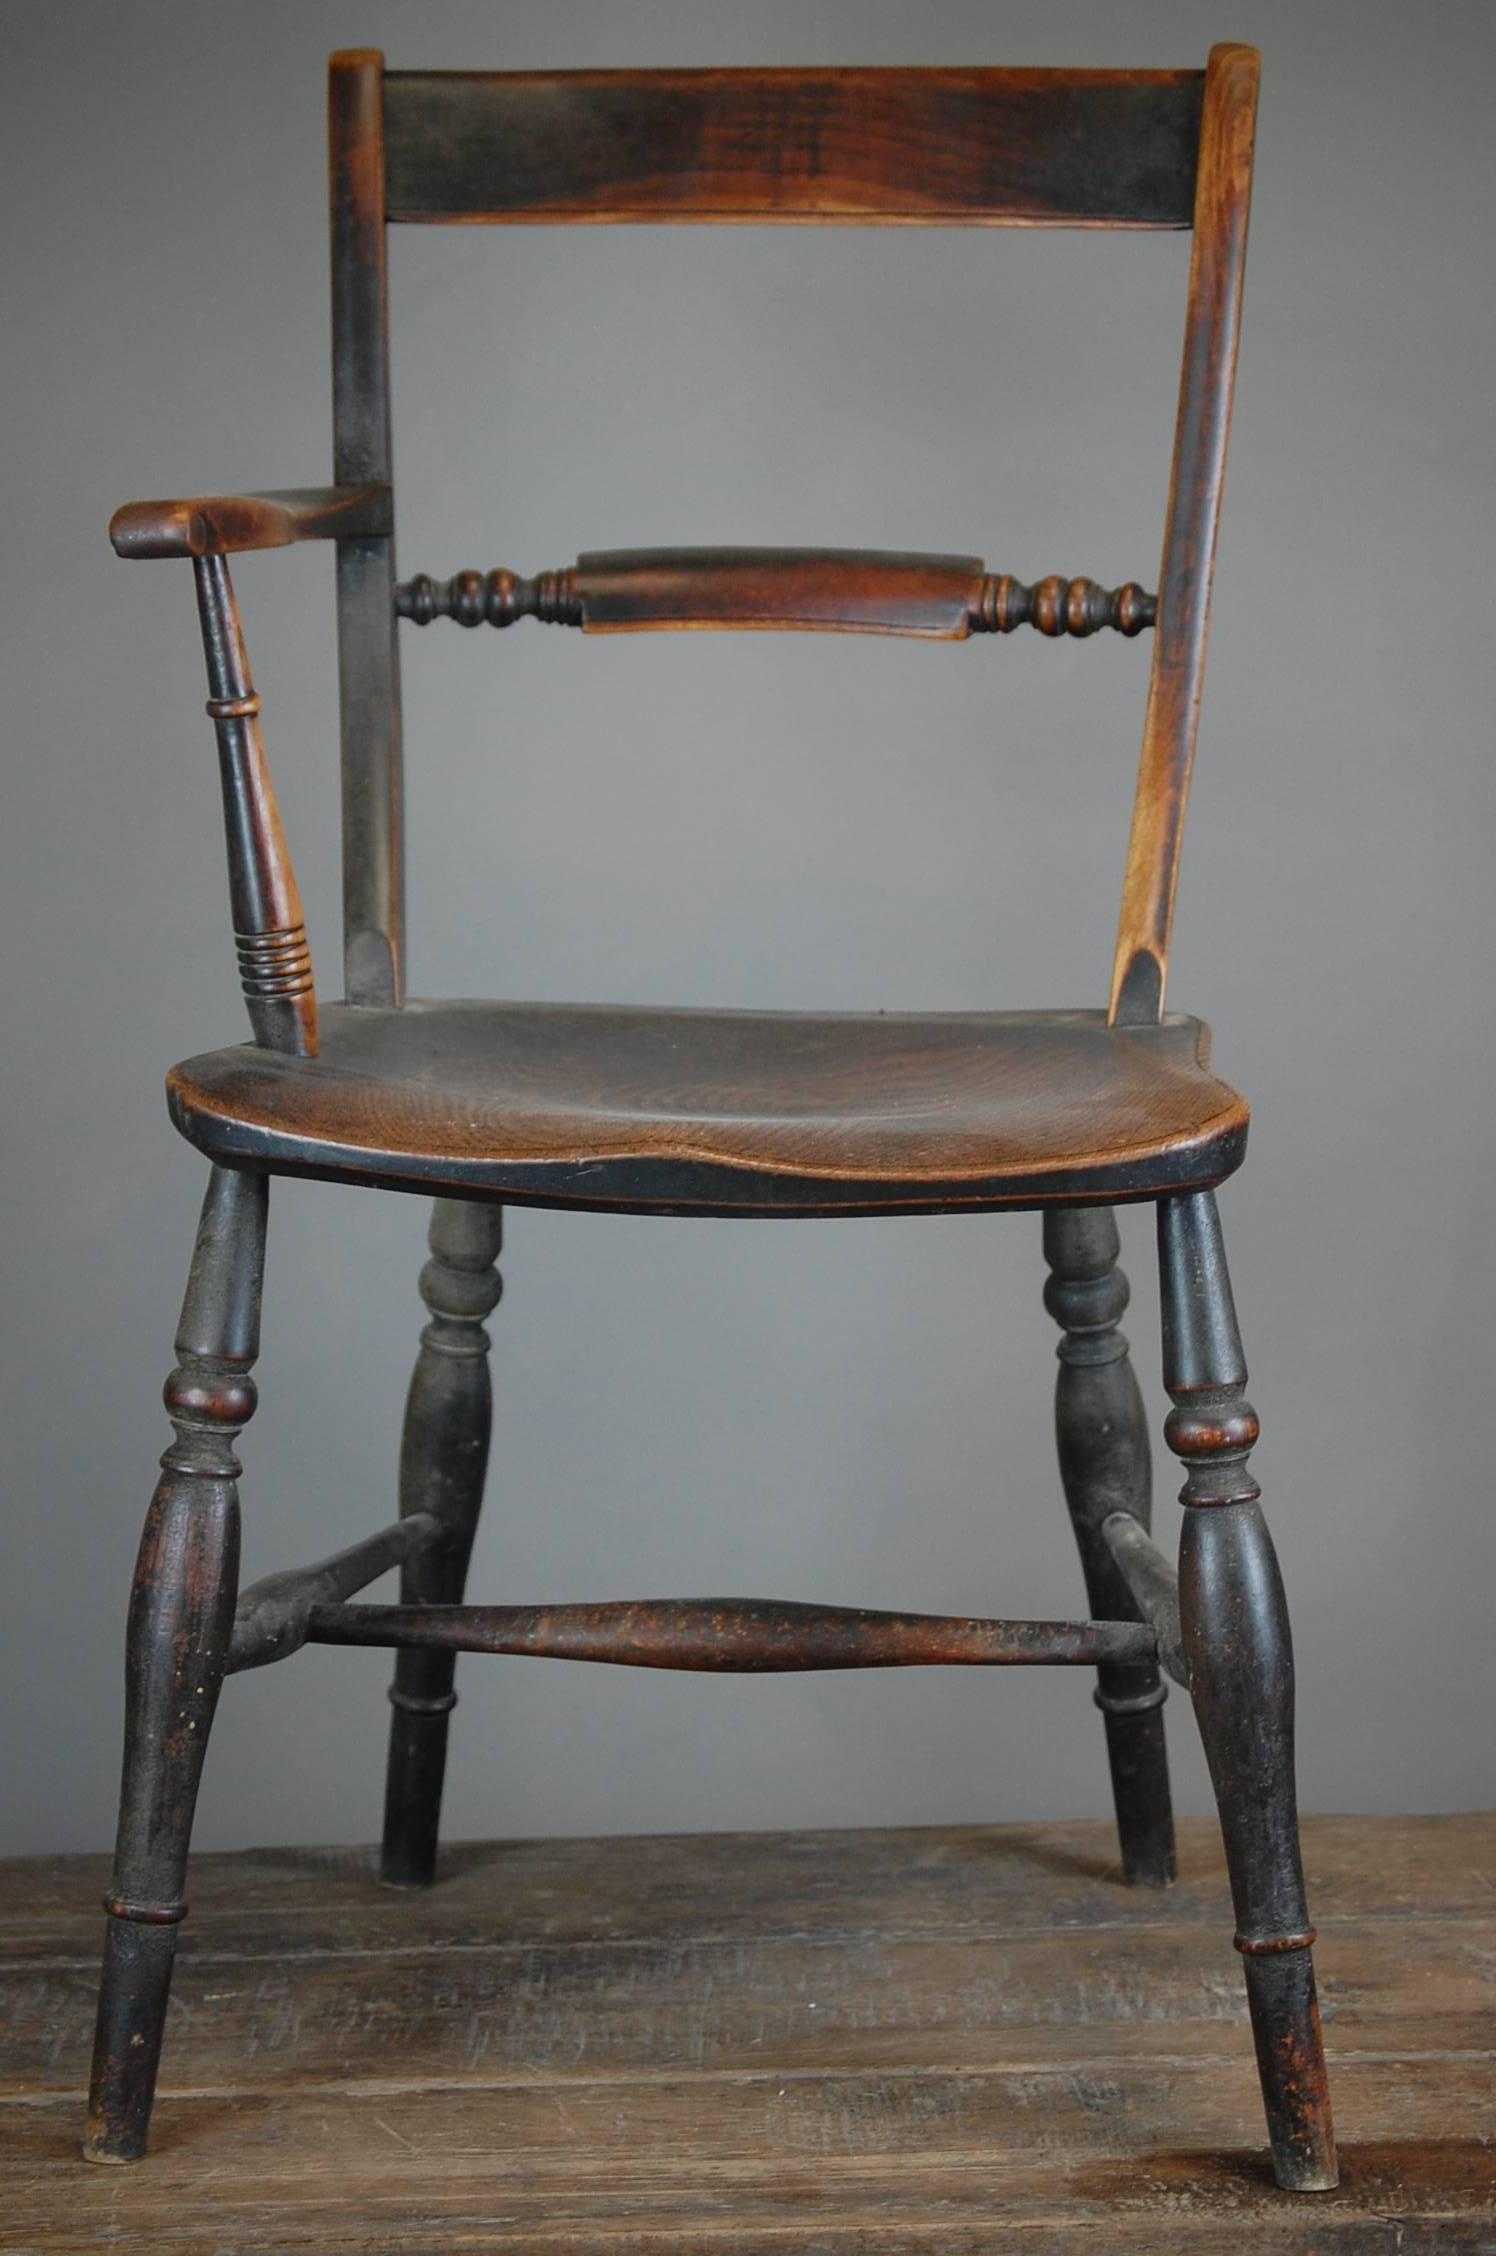 Wonderfully unusual late 19th century one armed military officers windsor chair. Manufactured with one arm to accommodate the officers dress sword whilst sitting. Totally original, wonderful patina.